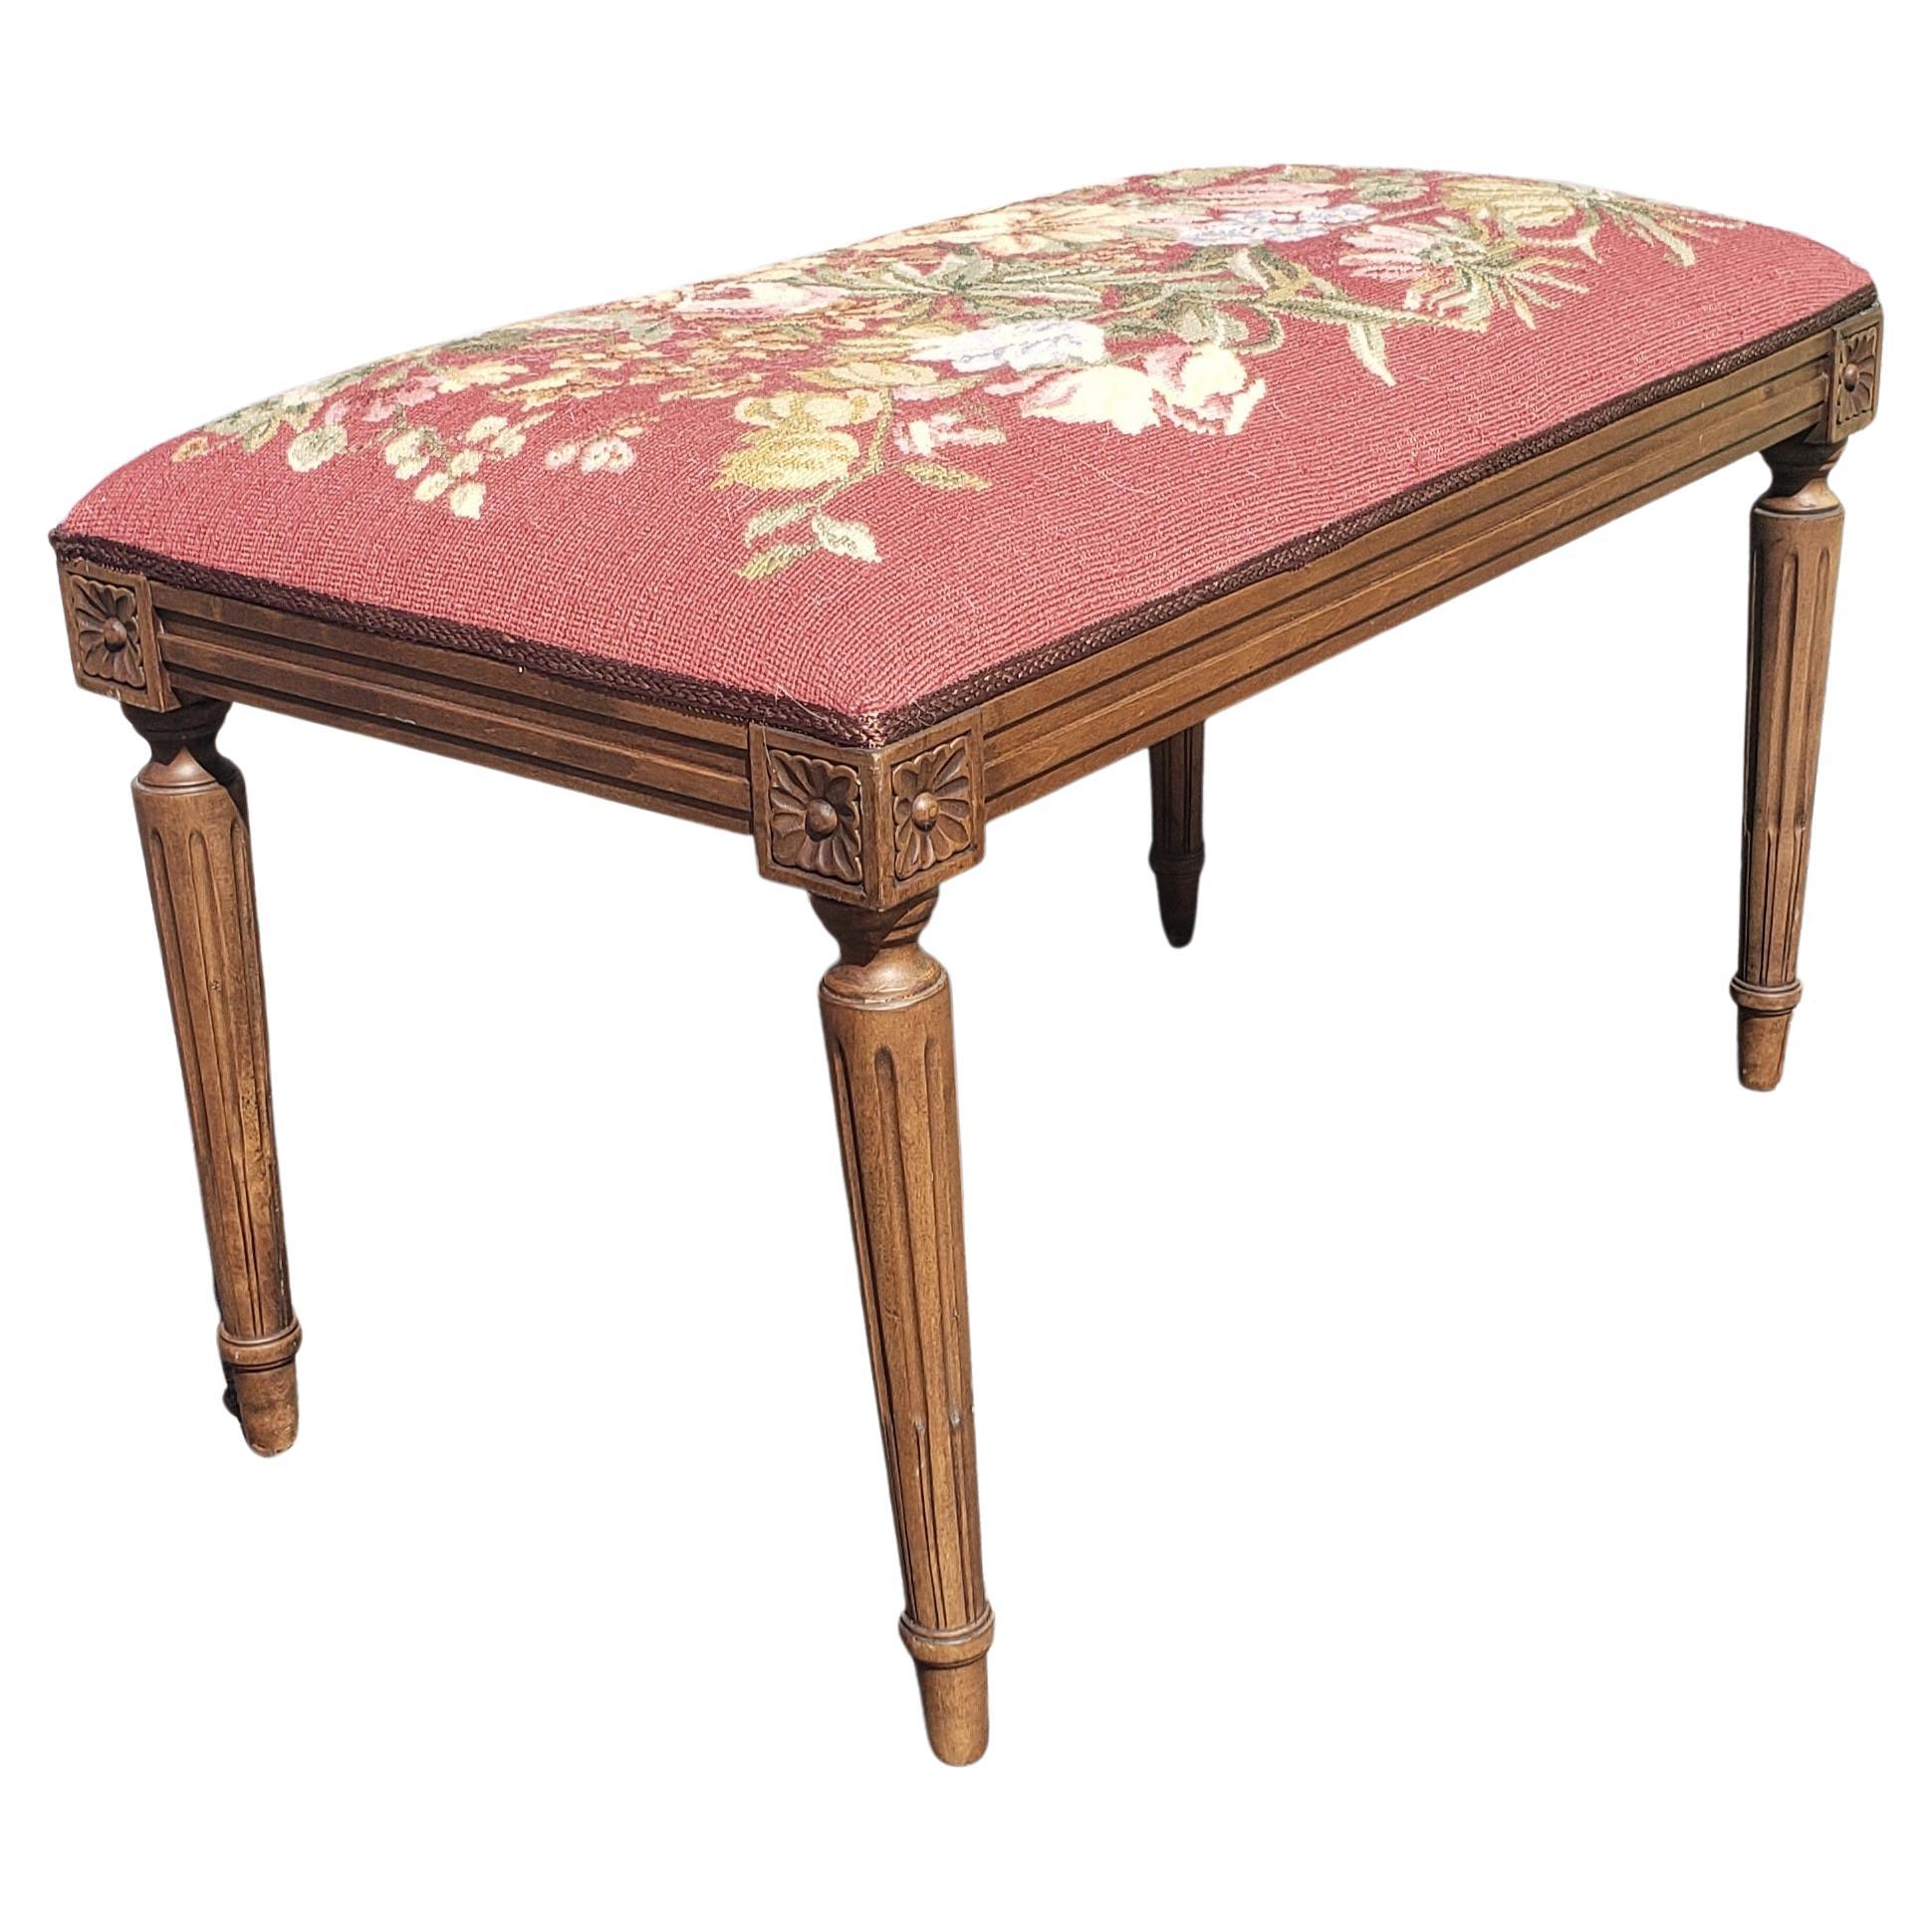 Louis XVI Style Walnut and Needlepoint Upholstered Tabouret Bench In Good Condition For Sale In Germantown, MD